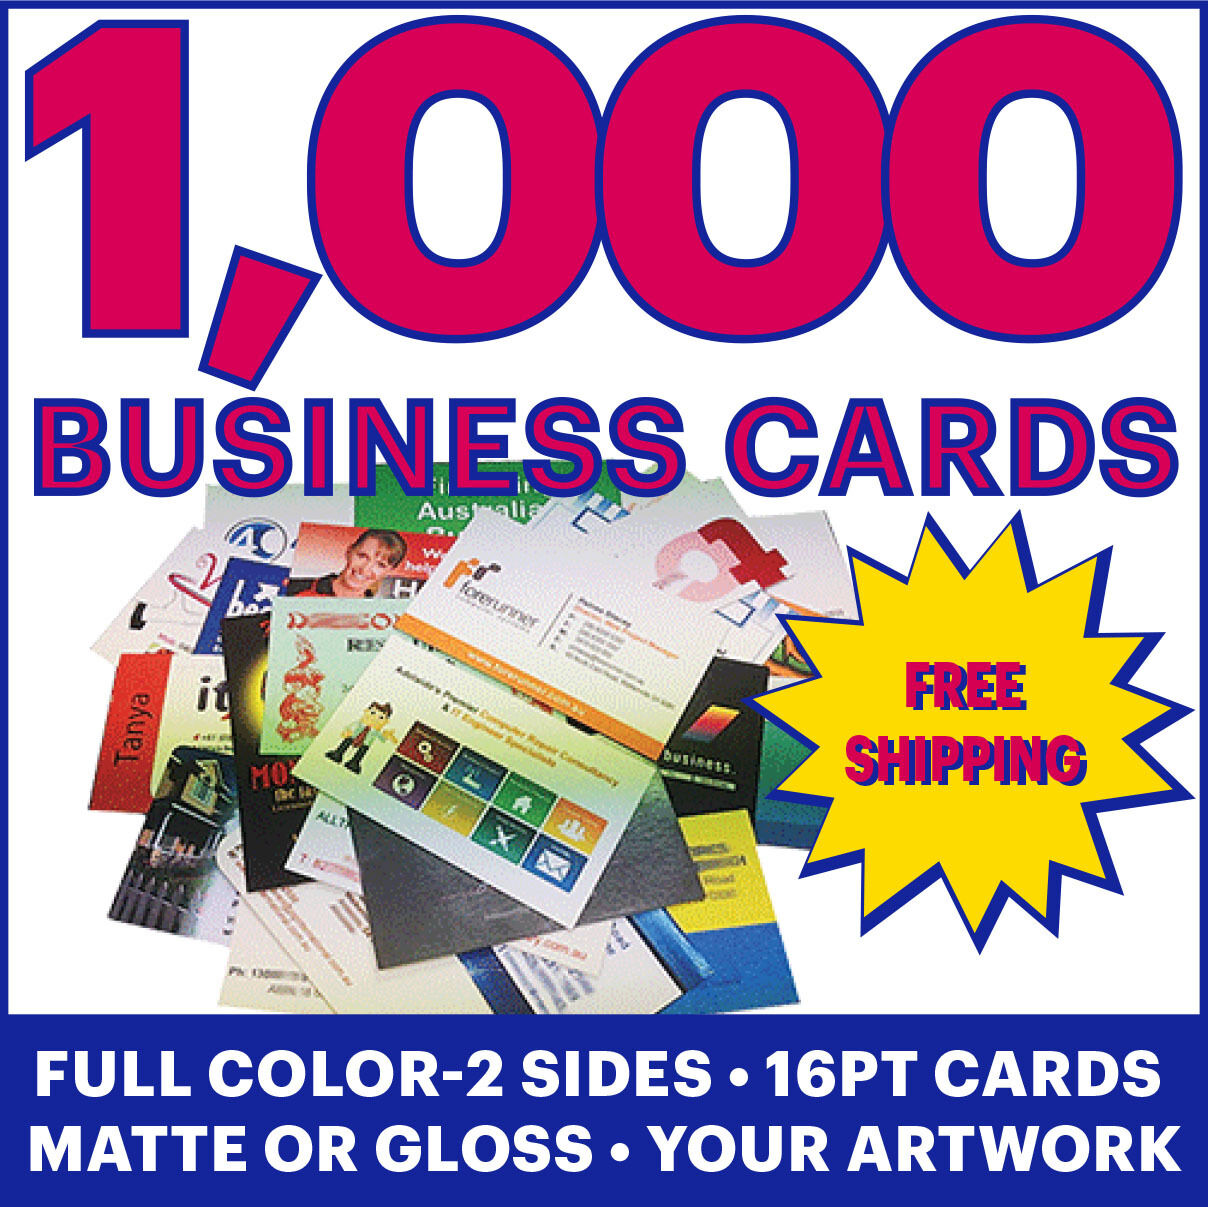 1000 Full Color Business Cards W/ Your Artwork Ready To Print - 2 Sided Glossy